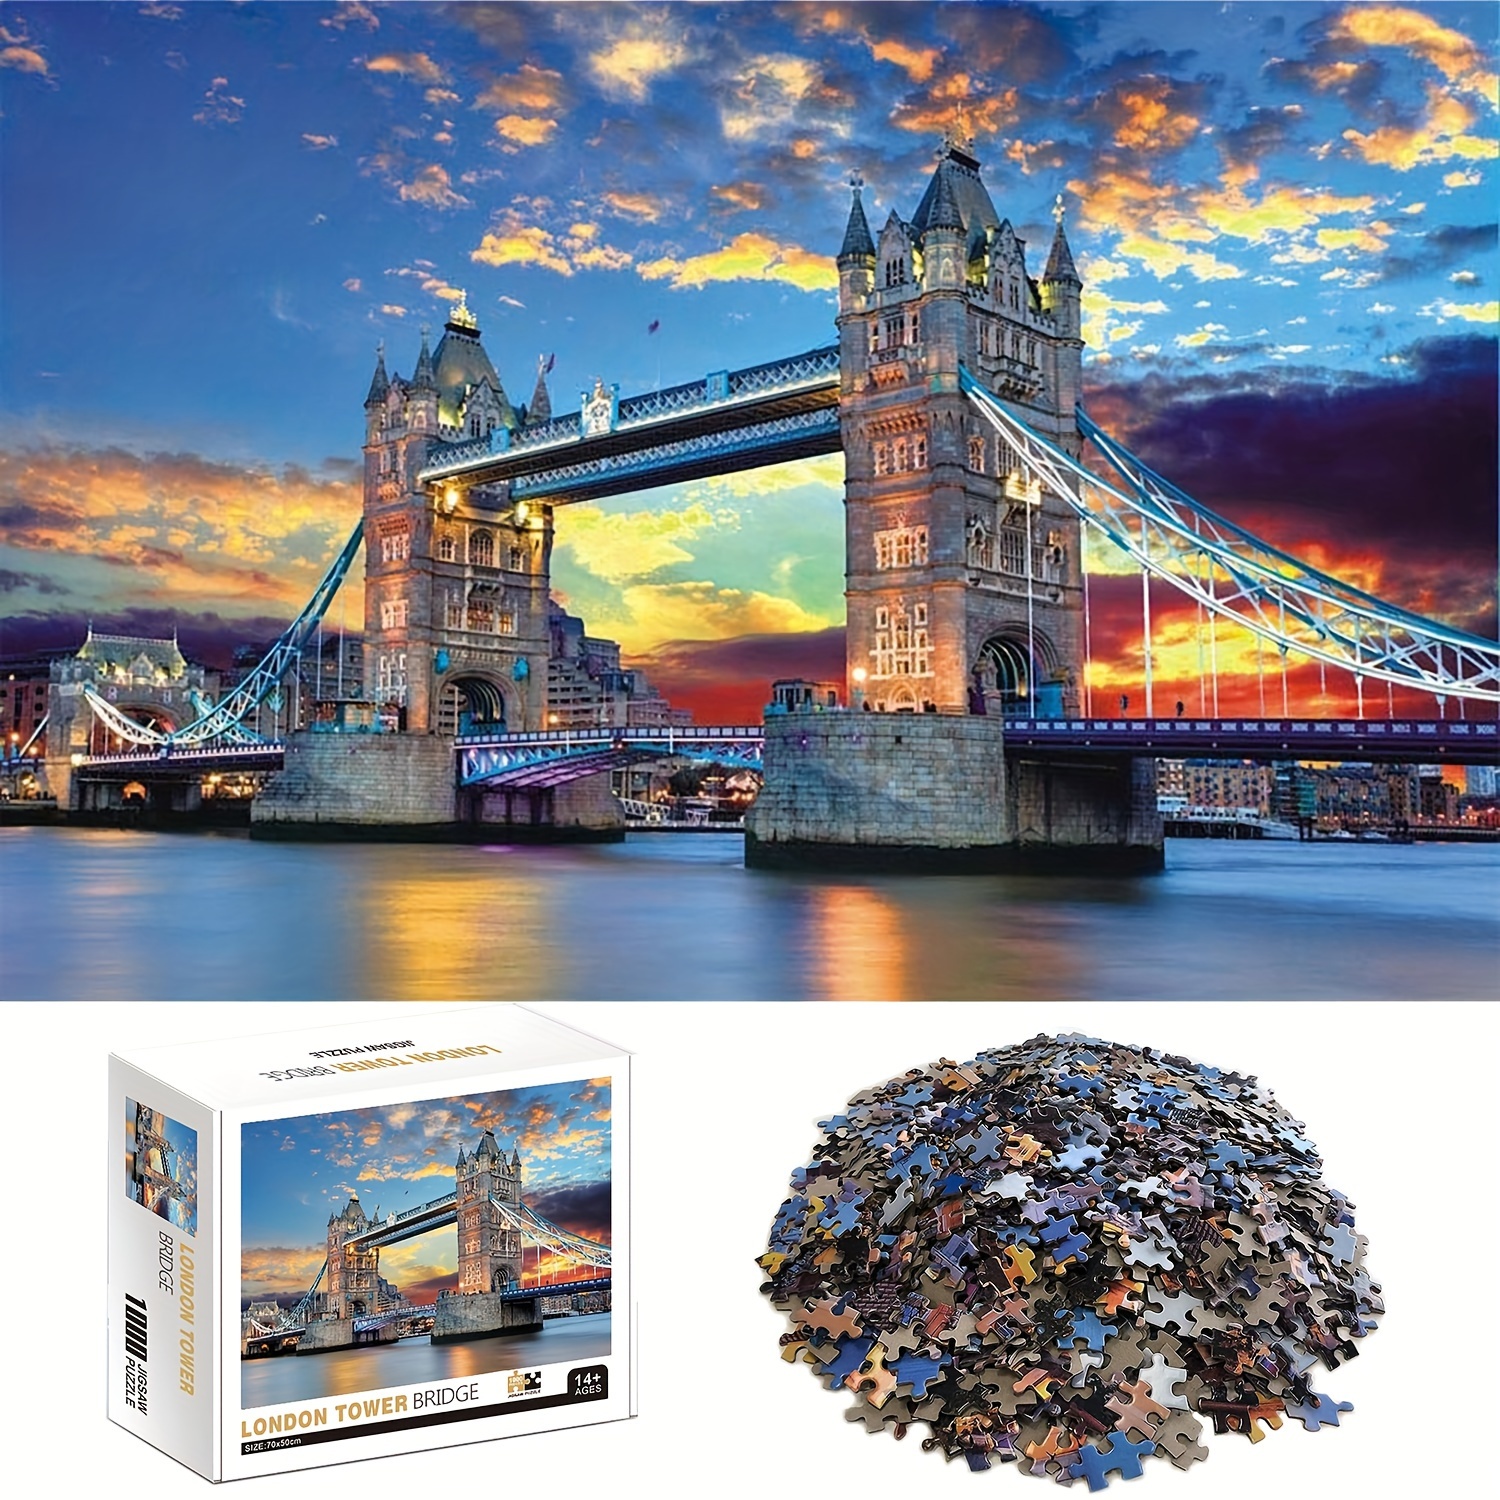 

1000pcs London Tower Bridge Puzzles, Thick And Durable Seamless Jigsaw Puzzles For Adults Fun Family Challenging Puzzles For Birthday, Christmas, Halloween, Thanksgiving, Easter